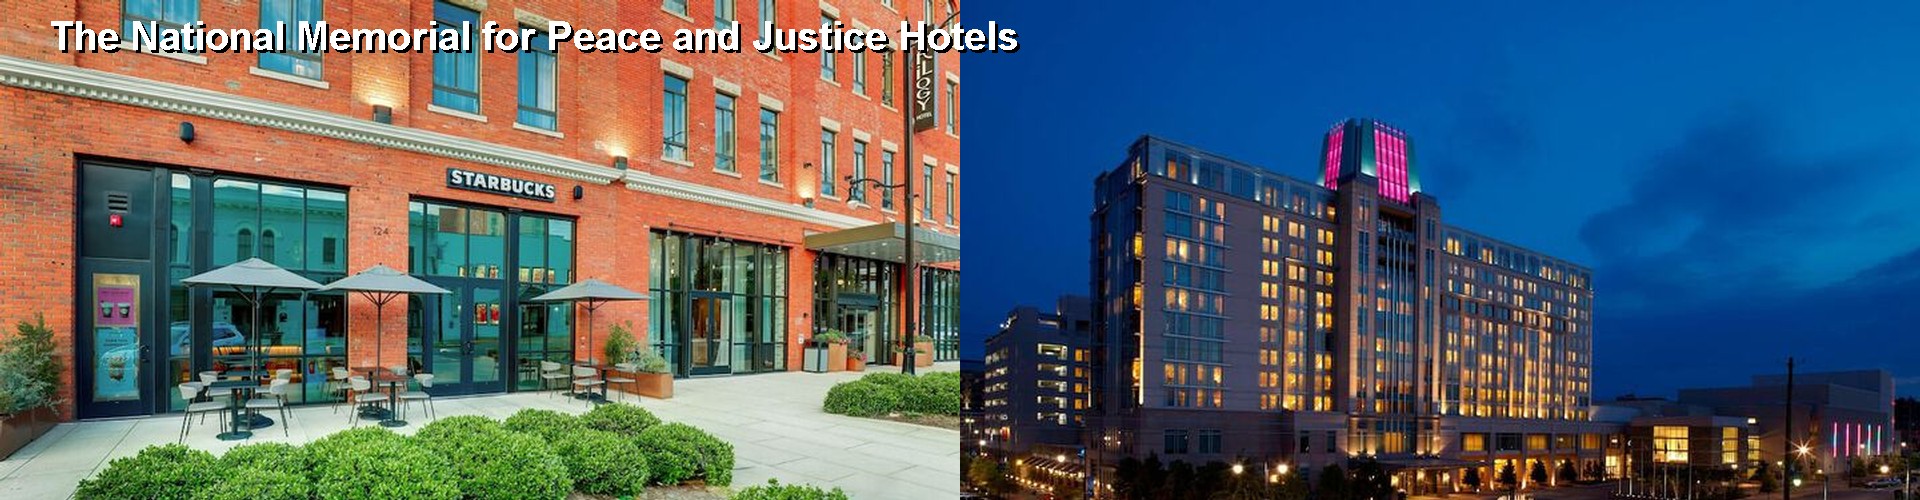 5 Best Hotels near The National Memorial for Peace and Justice